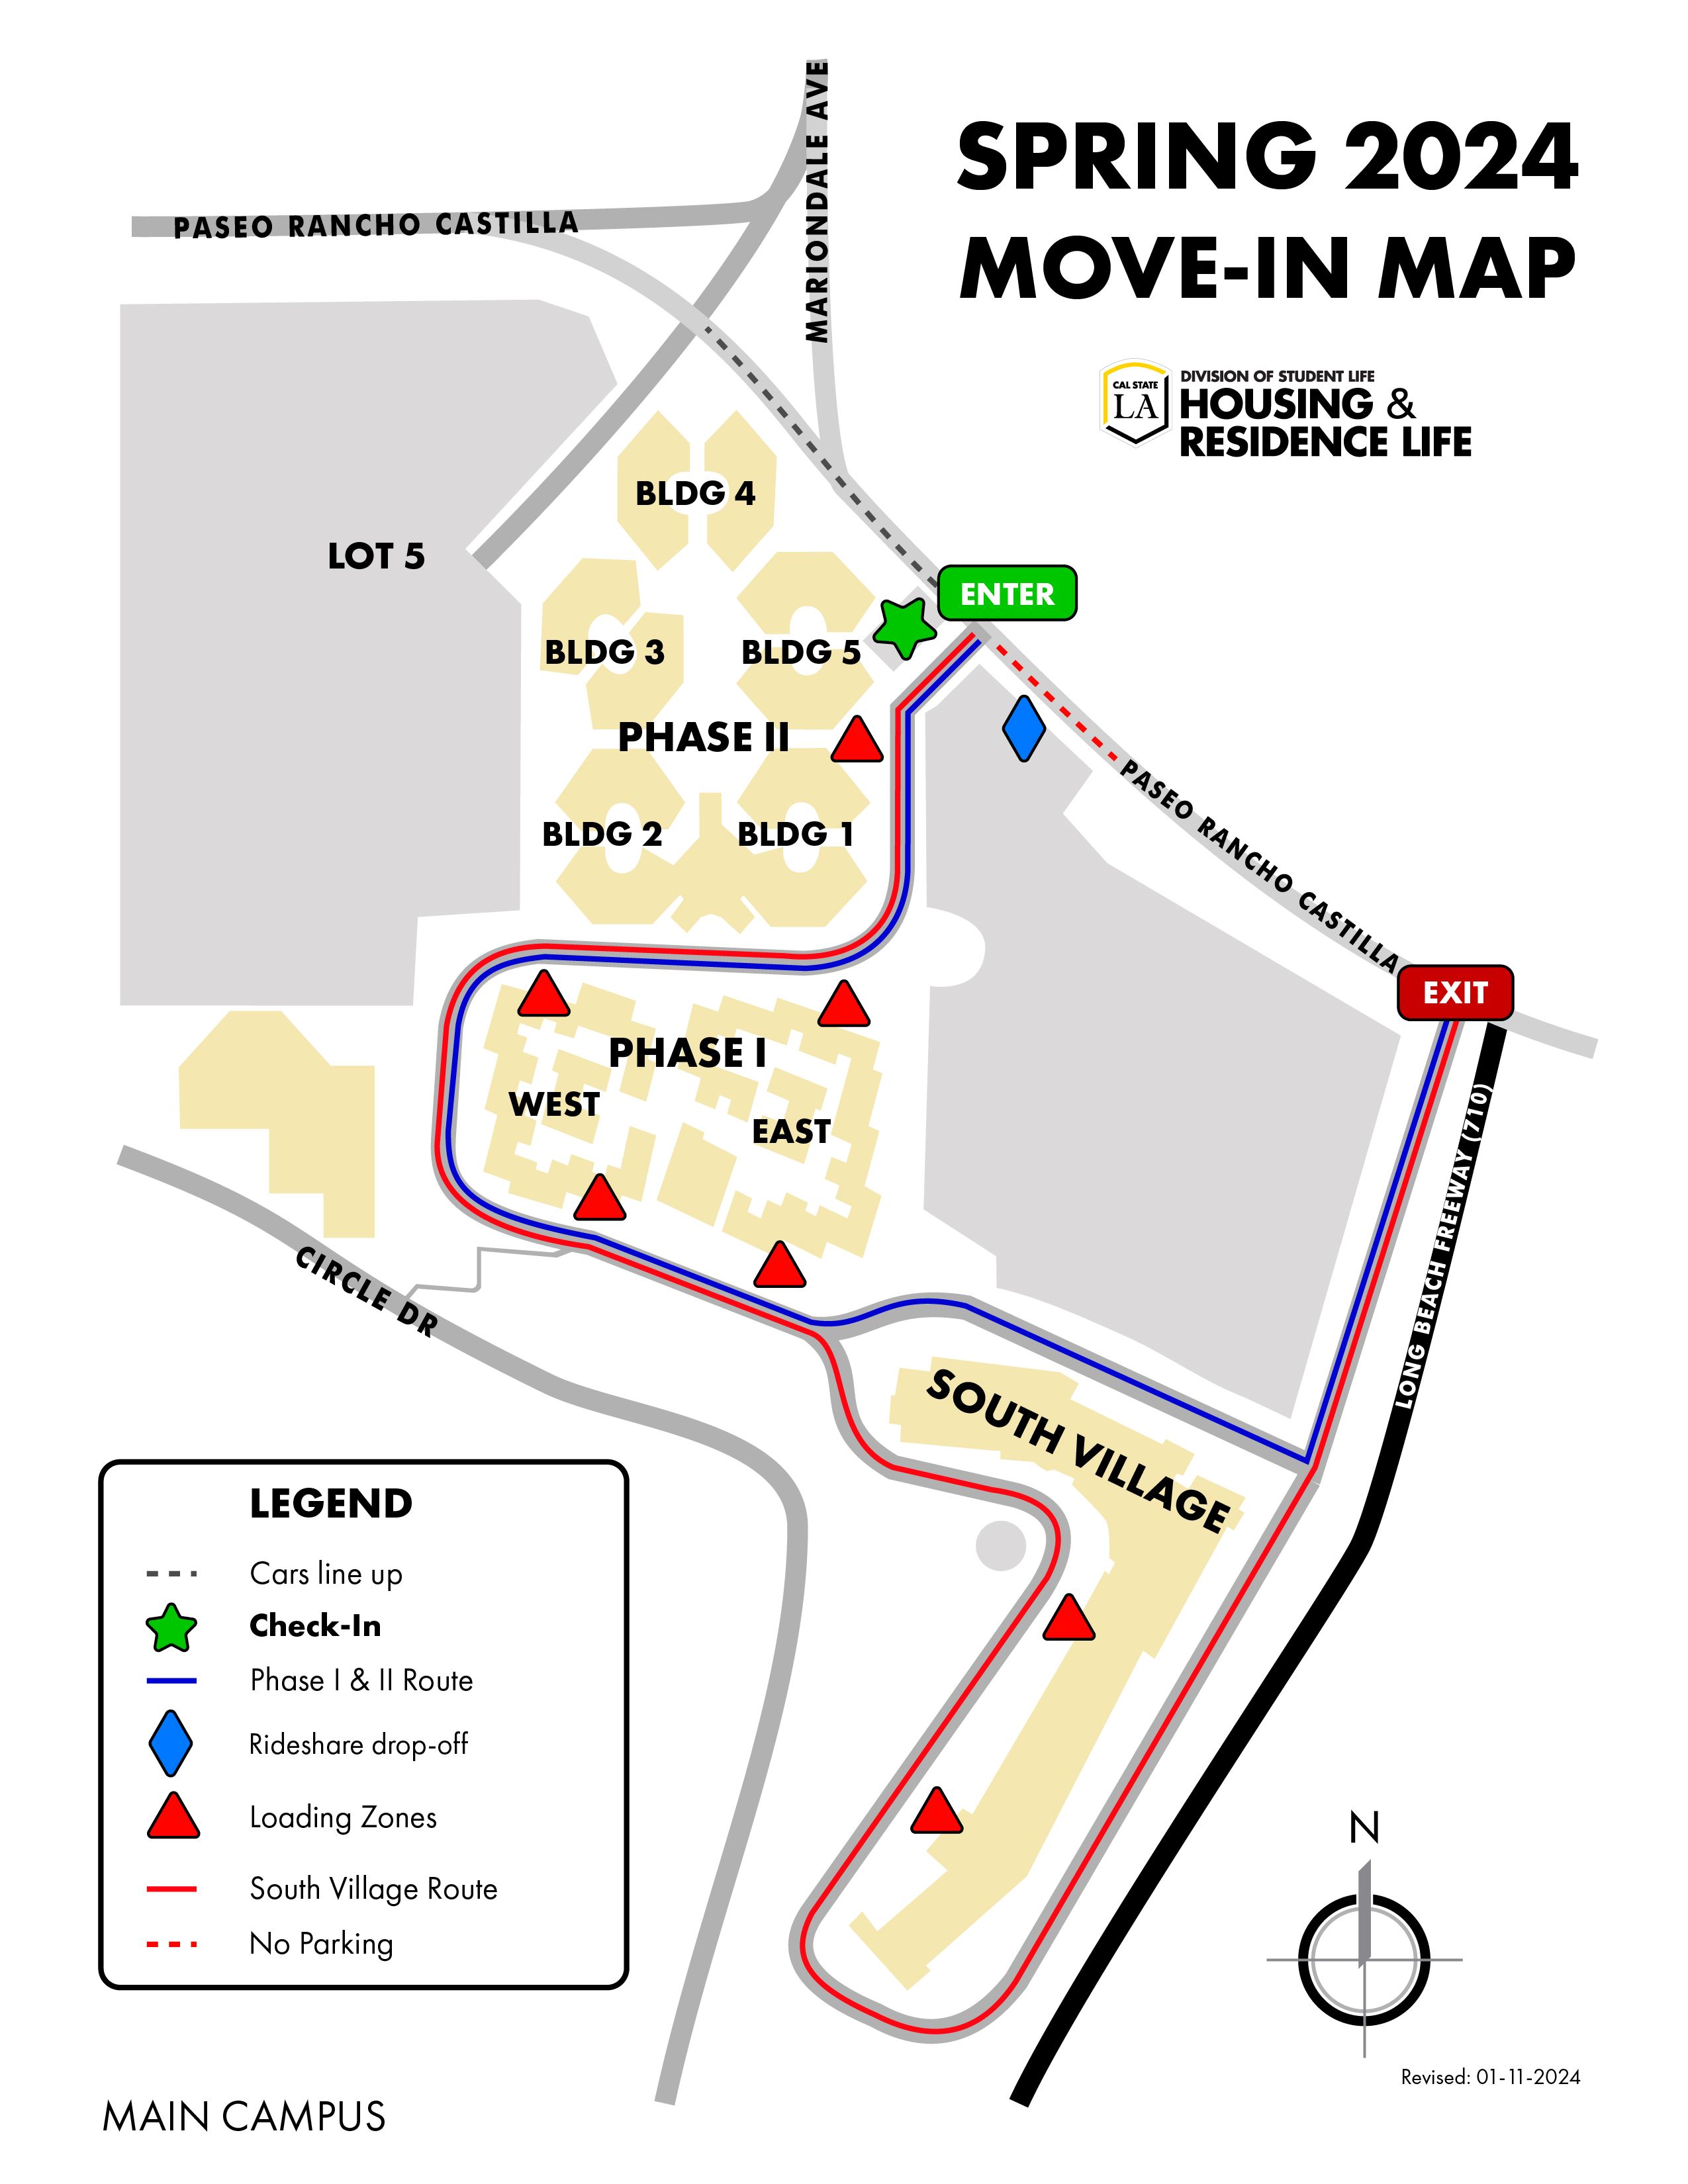 Spring 2024 Move-in Map. Cal State LA Division of Student Life Housing and Residence Life.